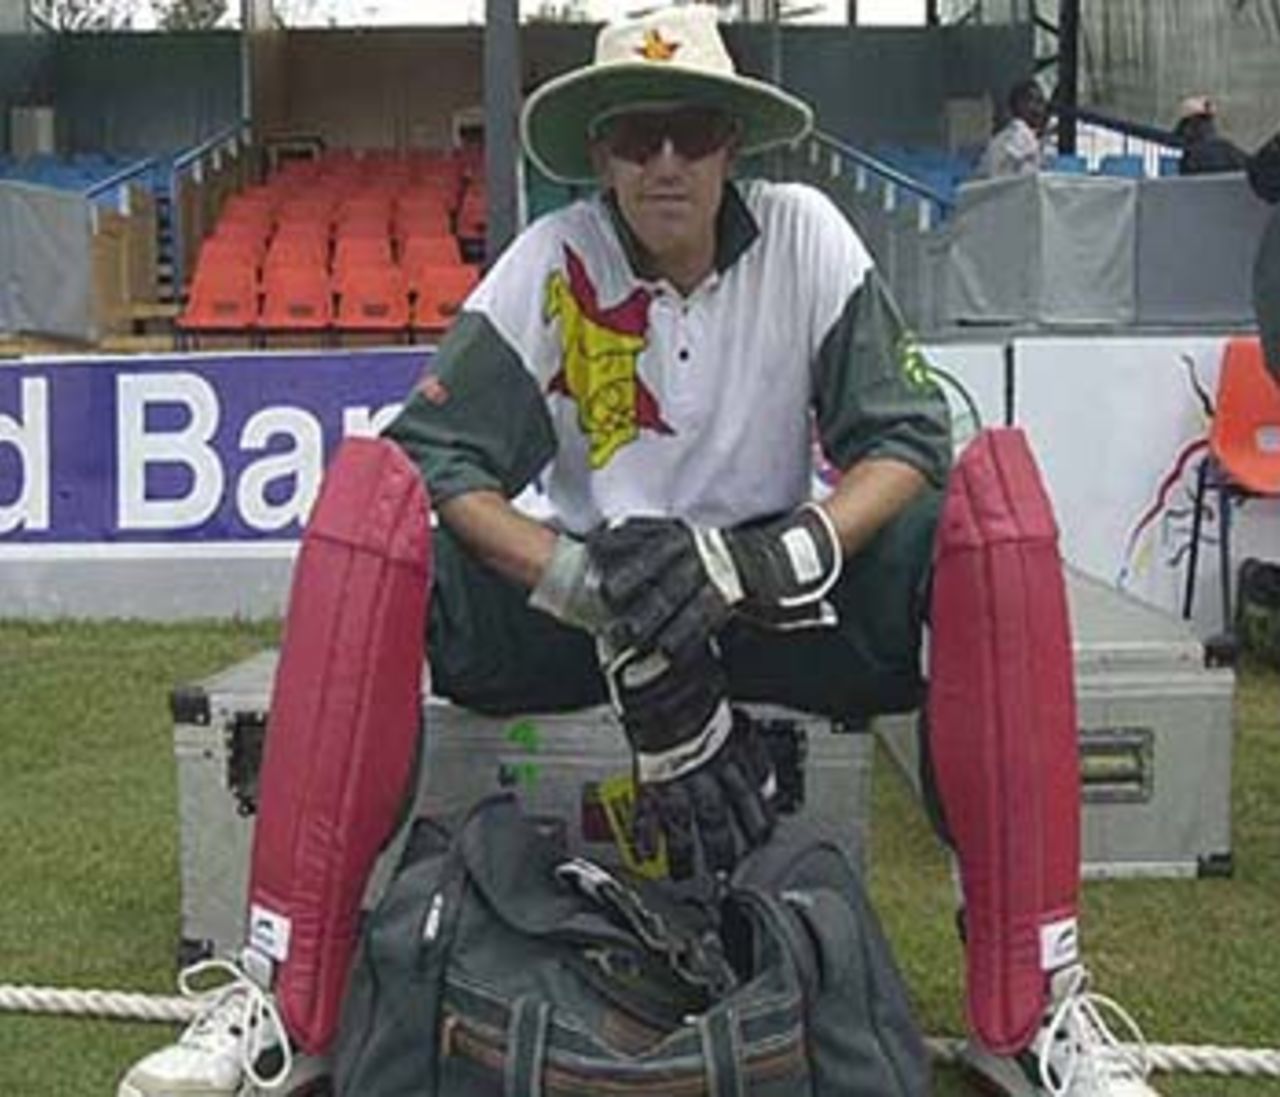 Andy Flower at a practice session before their encounter against New Zealand, ICC KnockOut, 2000/01, Gymkhana Club Ground, Nairobi, 06 October 2000.